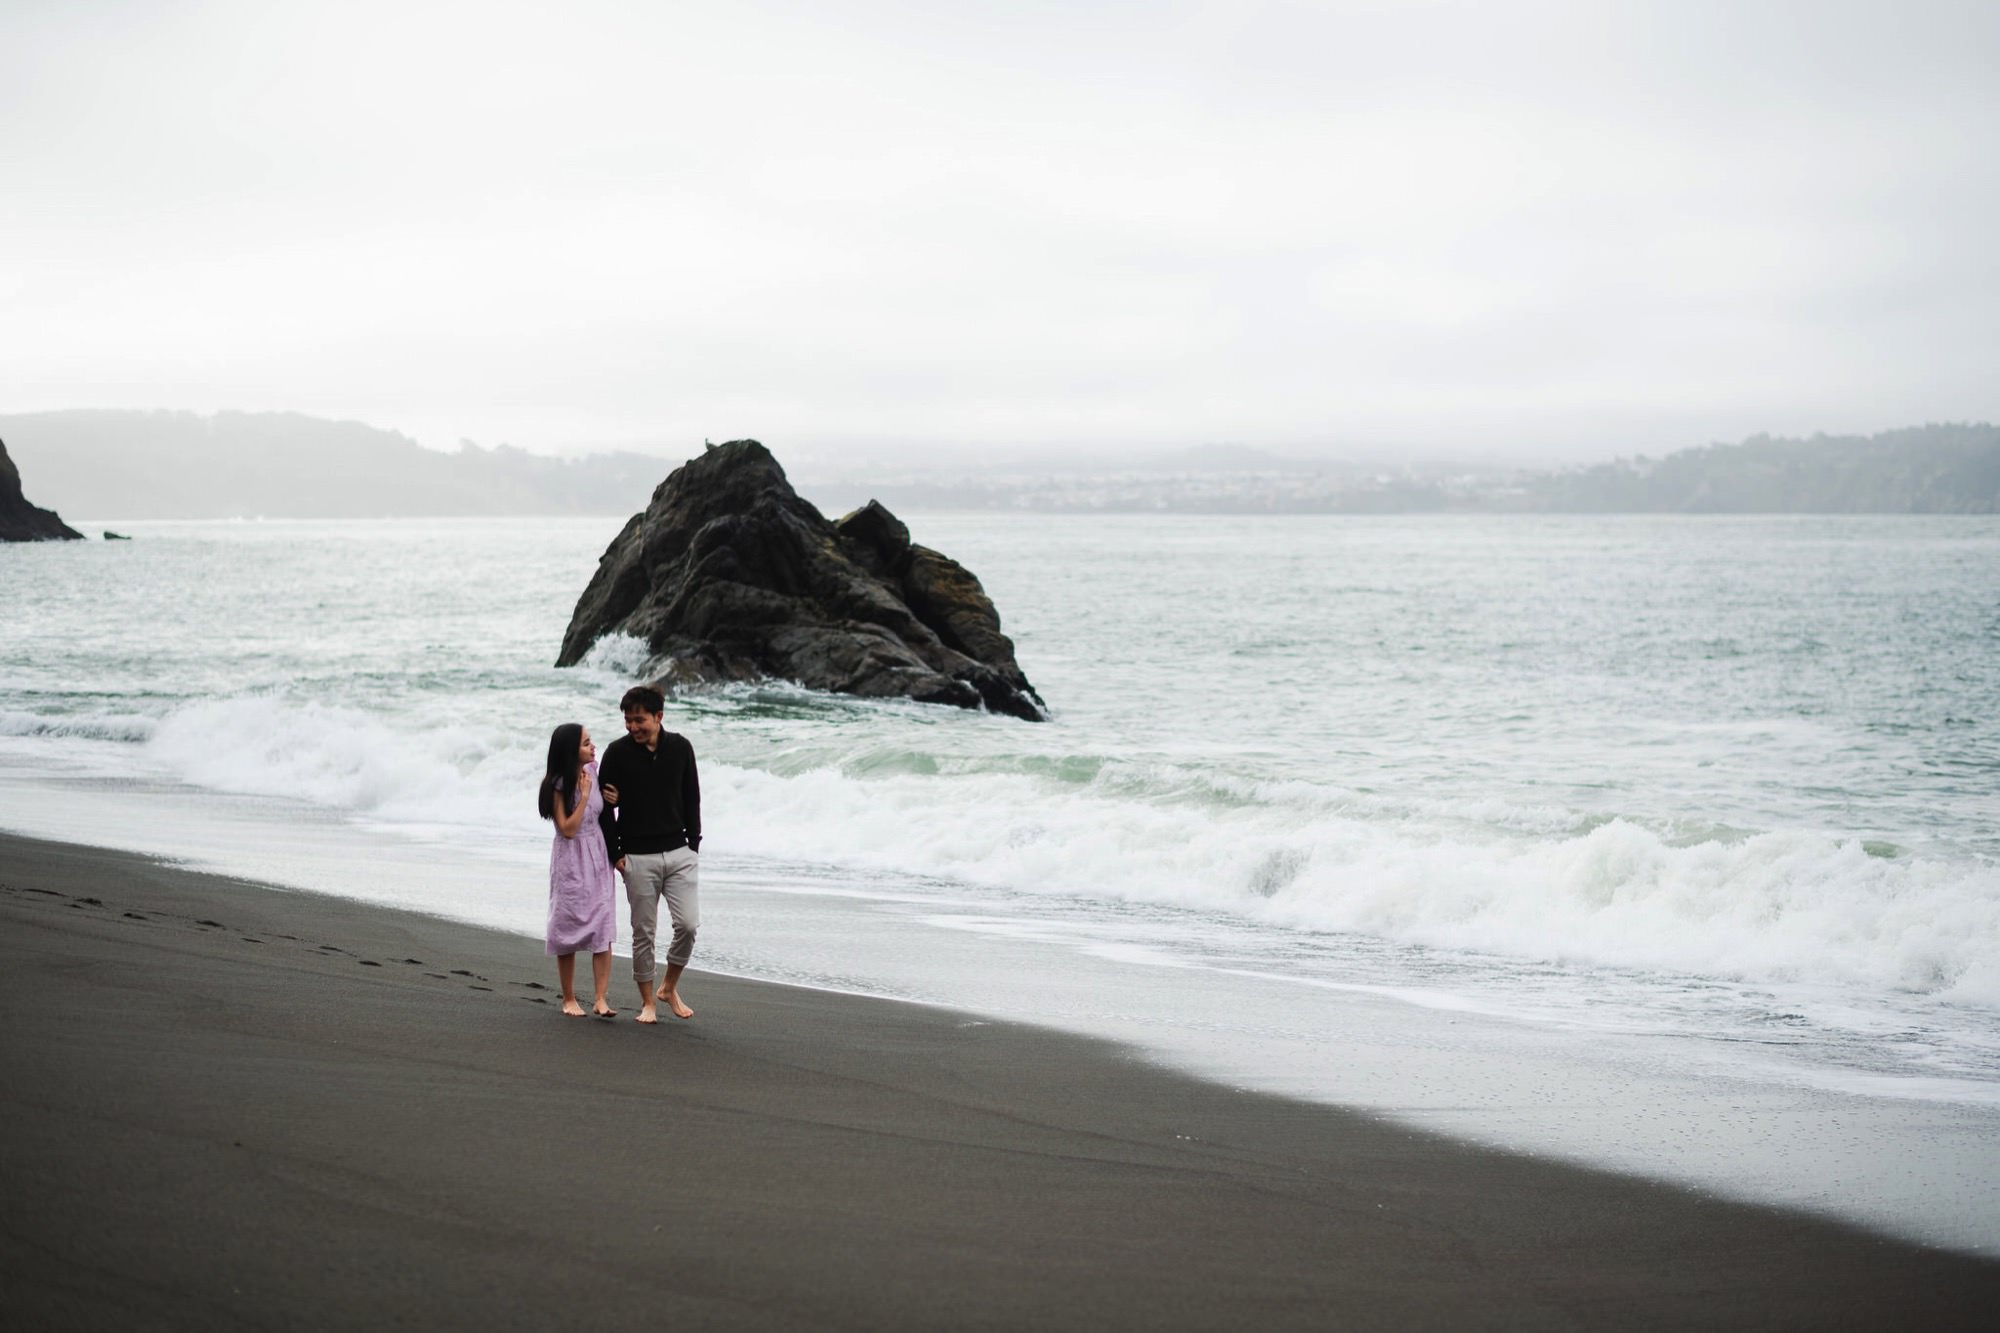  Marin Headlands Engagement Session // Alan + Thu - Photo by Trung Hoang Photography | www.trunghoangphotography.com | San Francisco Bay Area Wedding Photographer 